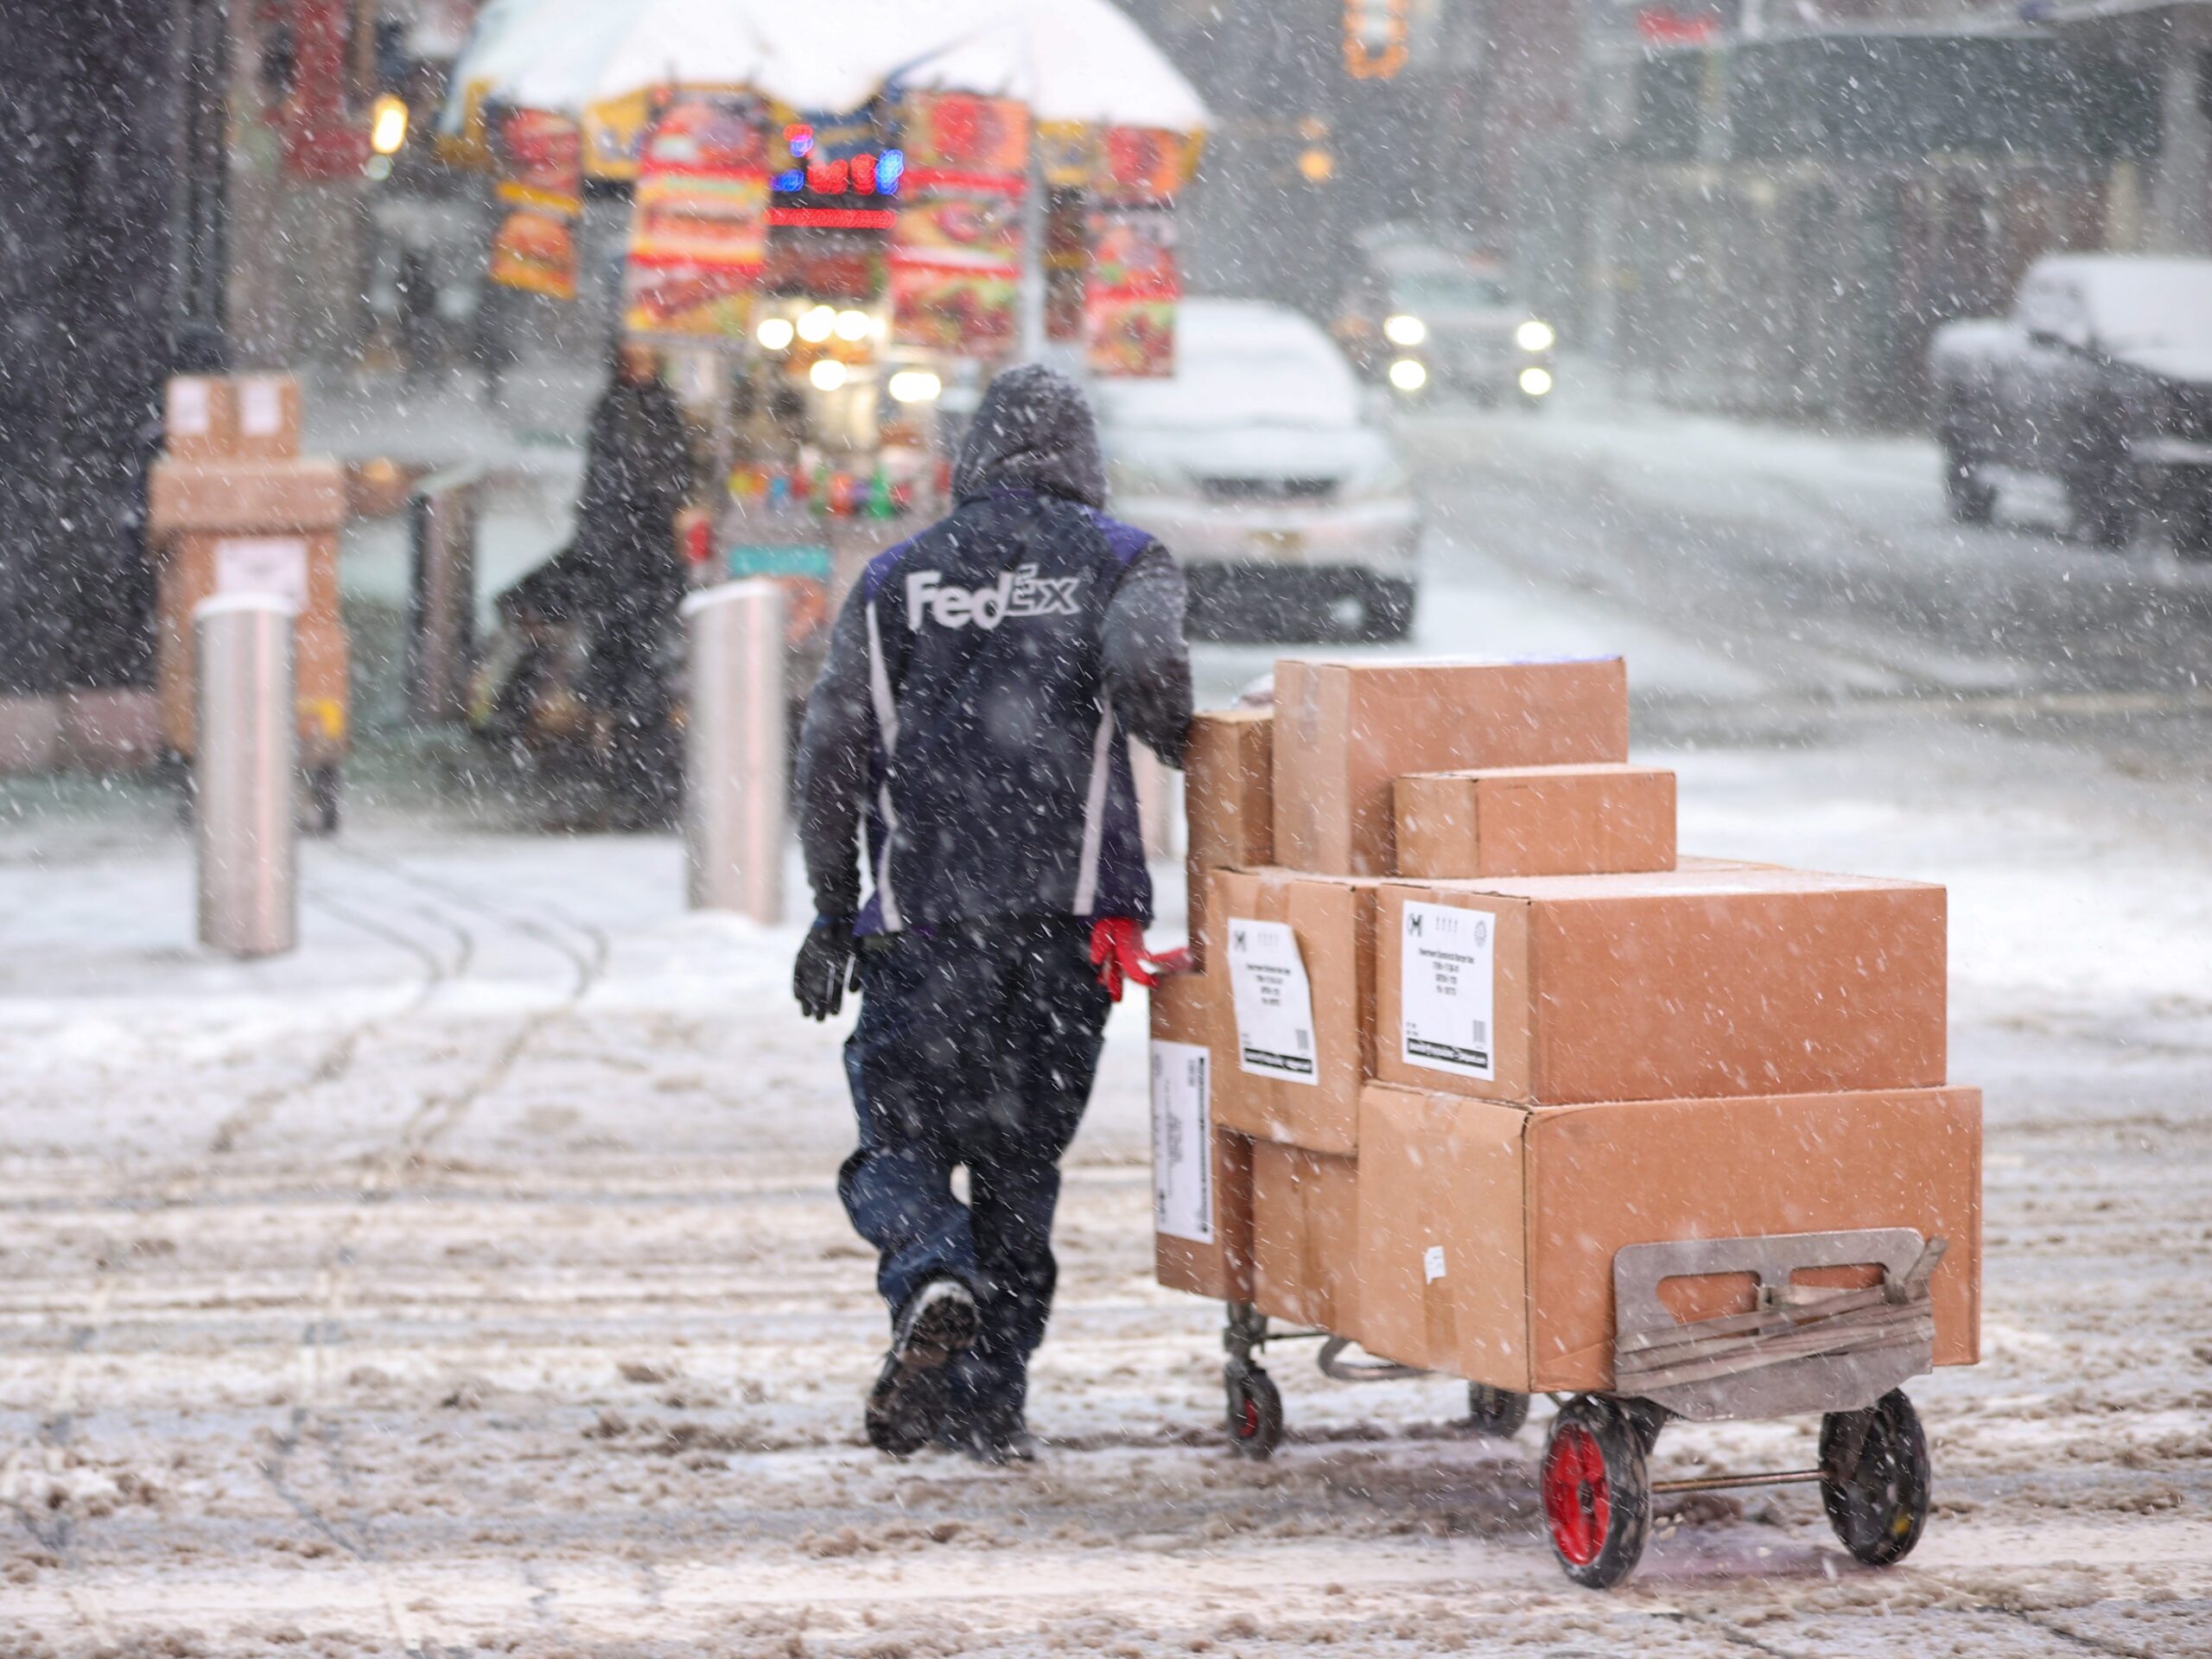 Man delivering packages in the snow